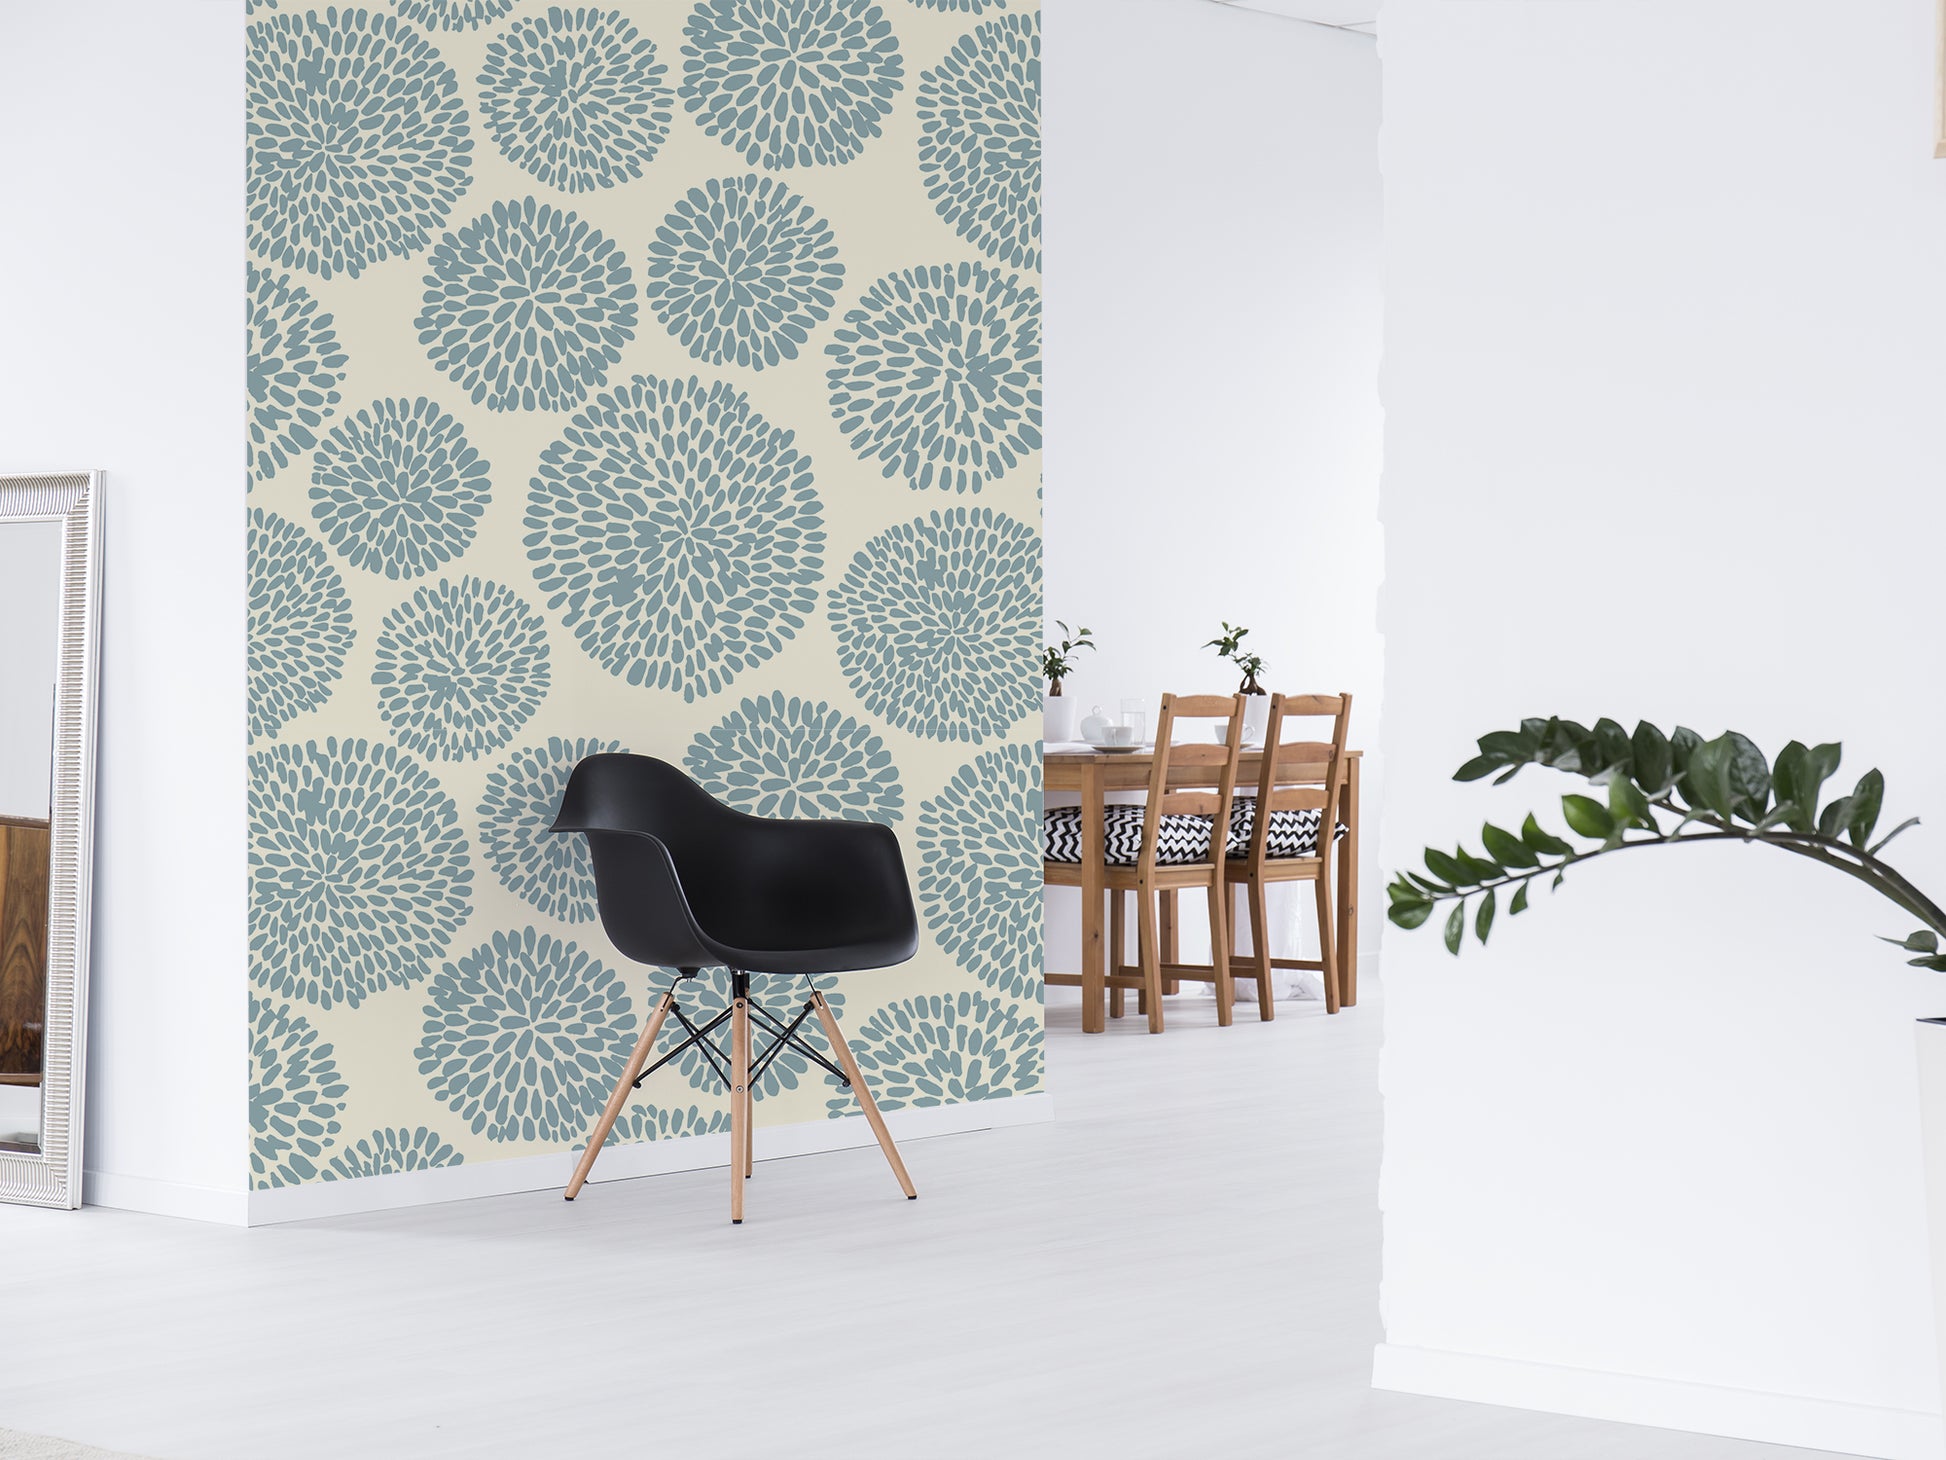 Auxence Bleu Blue Cream Circle Wallpaper in a White Hallway with a Black Eames Chair